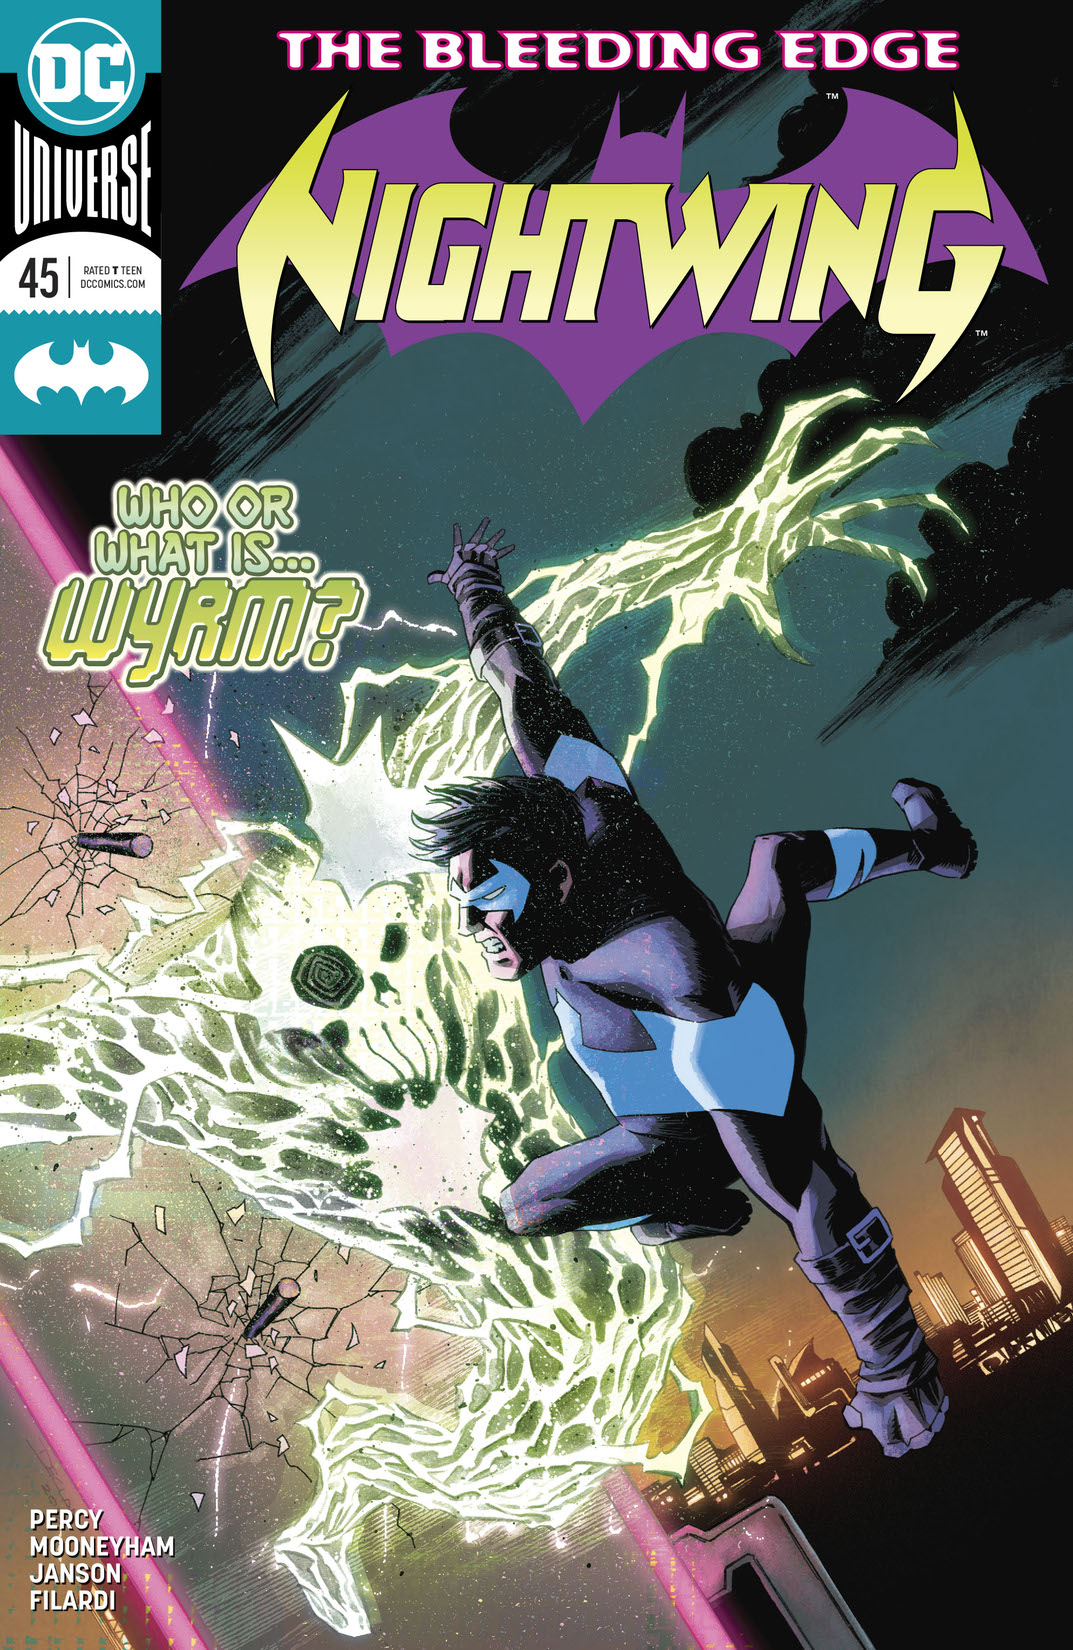 Nightwing (2016-) #45 preview images